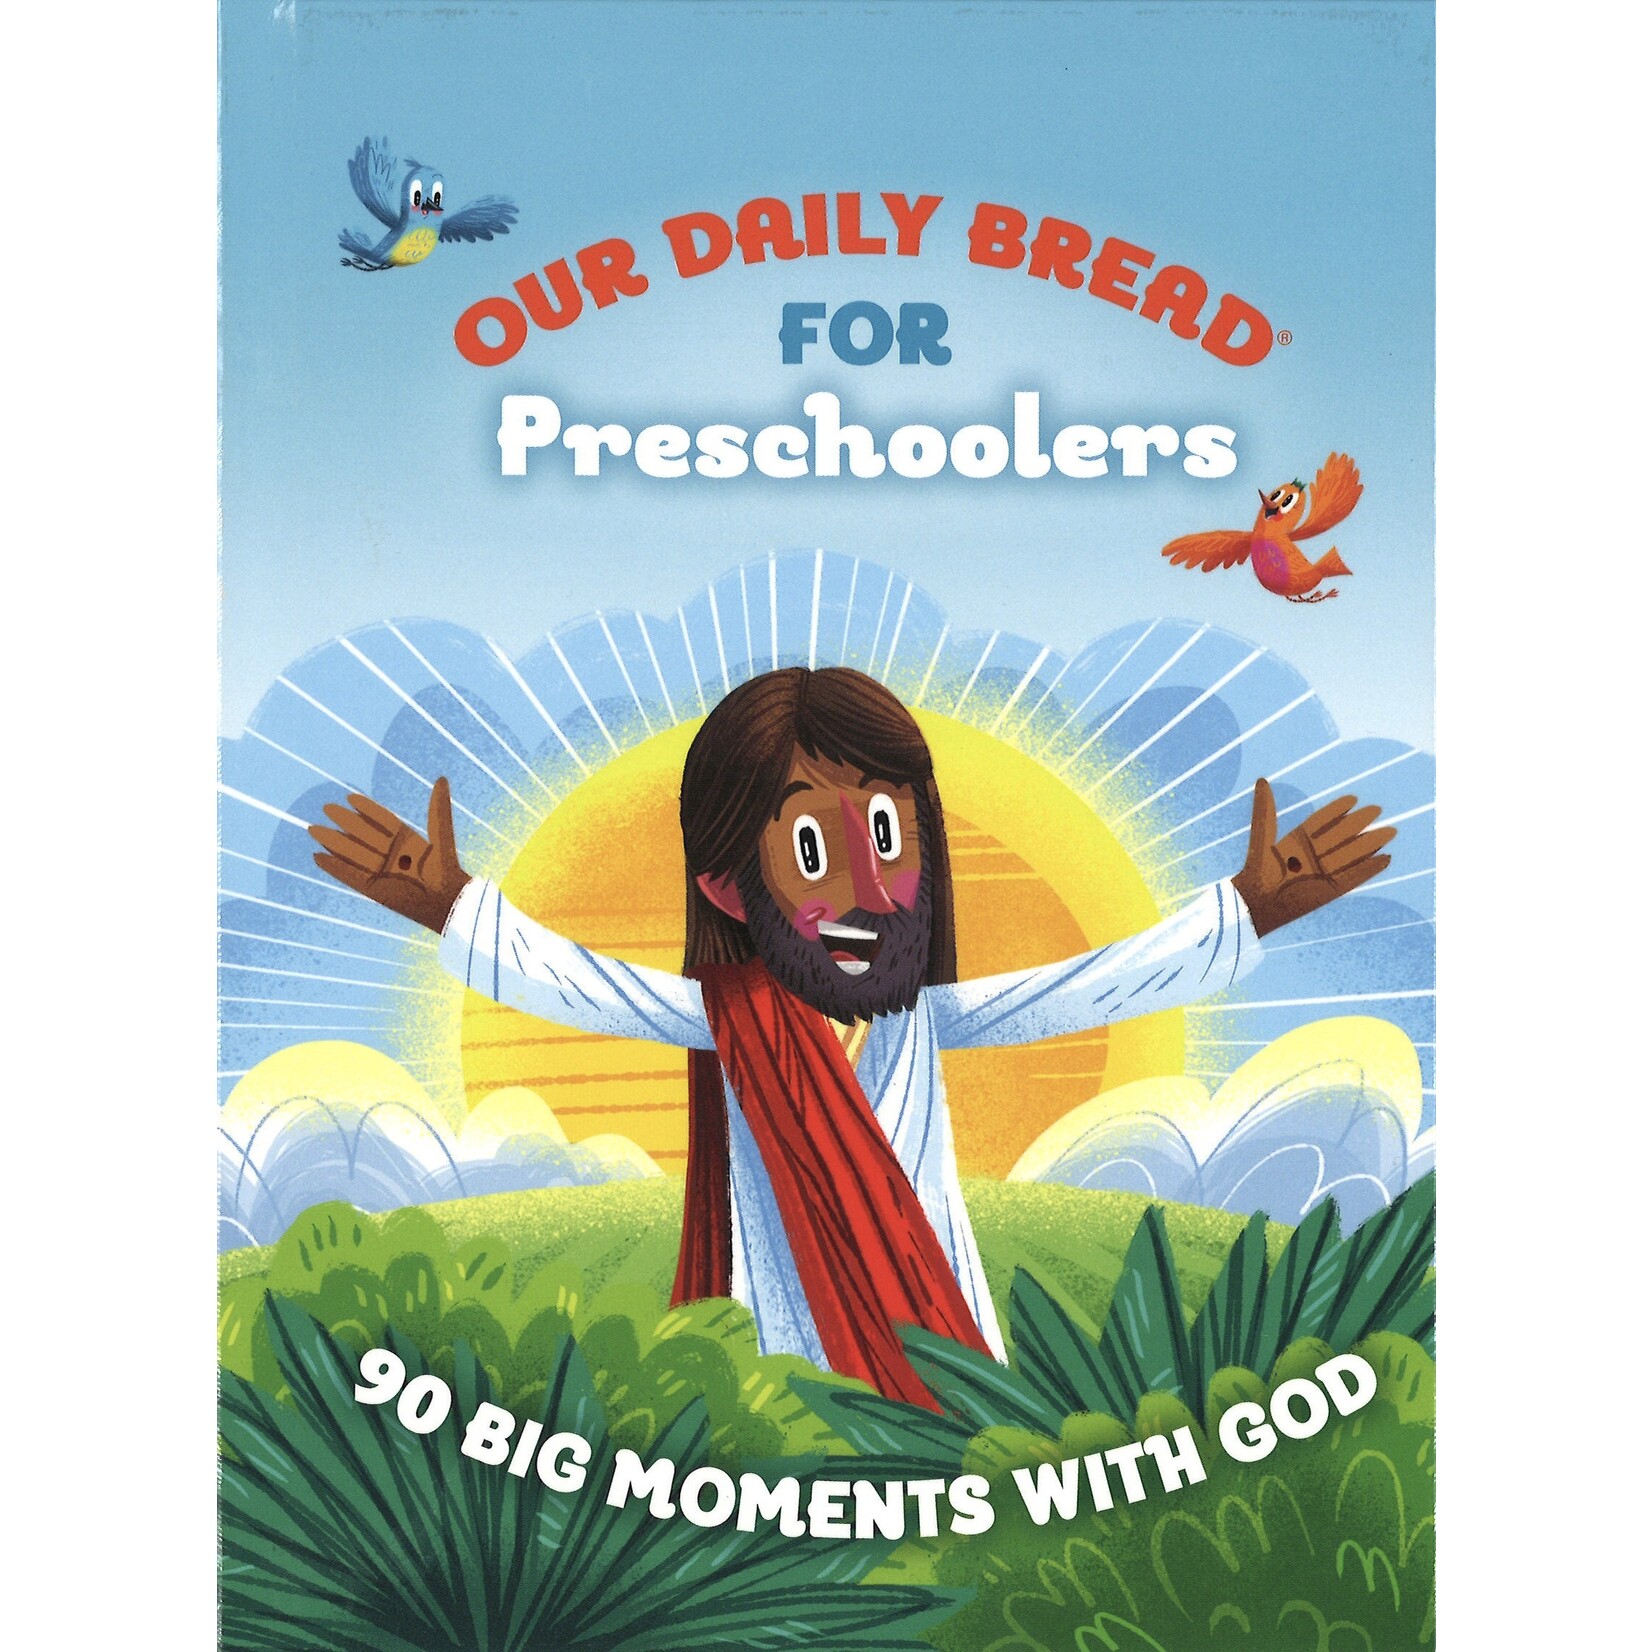 OUR DAILY BREAD FOR PRESCHOOLERS